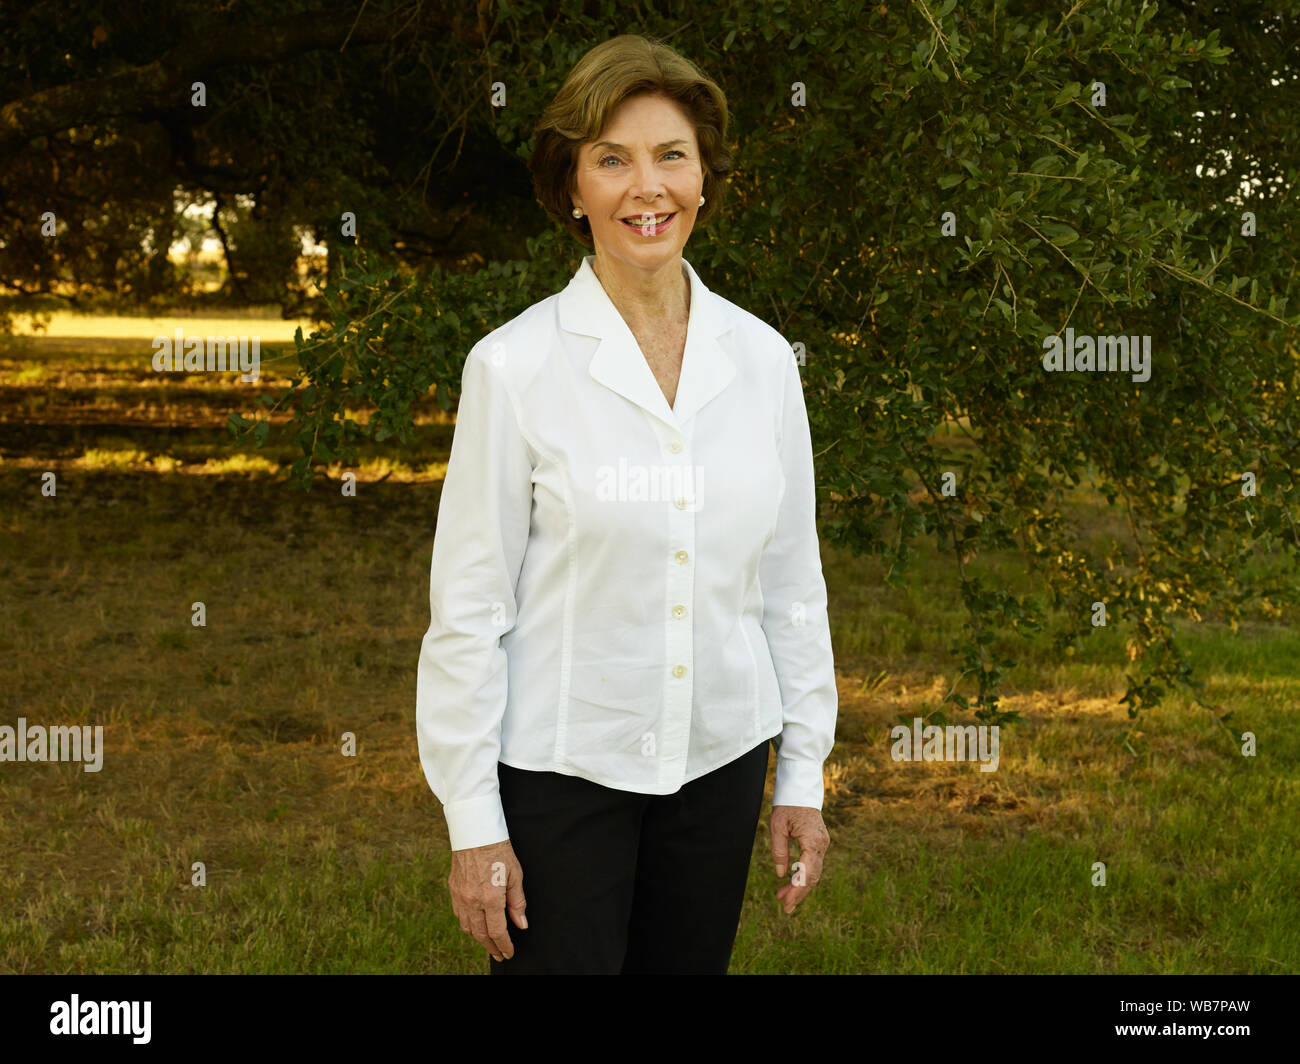 Former U.S. first lady Laura Bush at her and former president George W. Bush's 1,600-acre ranch, site of the Texas White House during their visits there during the Bush presidency, near Crawford in McLennon County, Texas Stock Photo